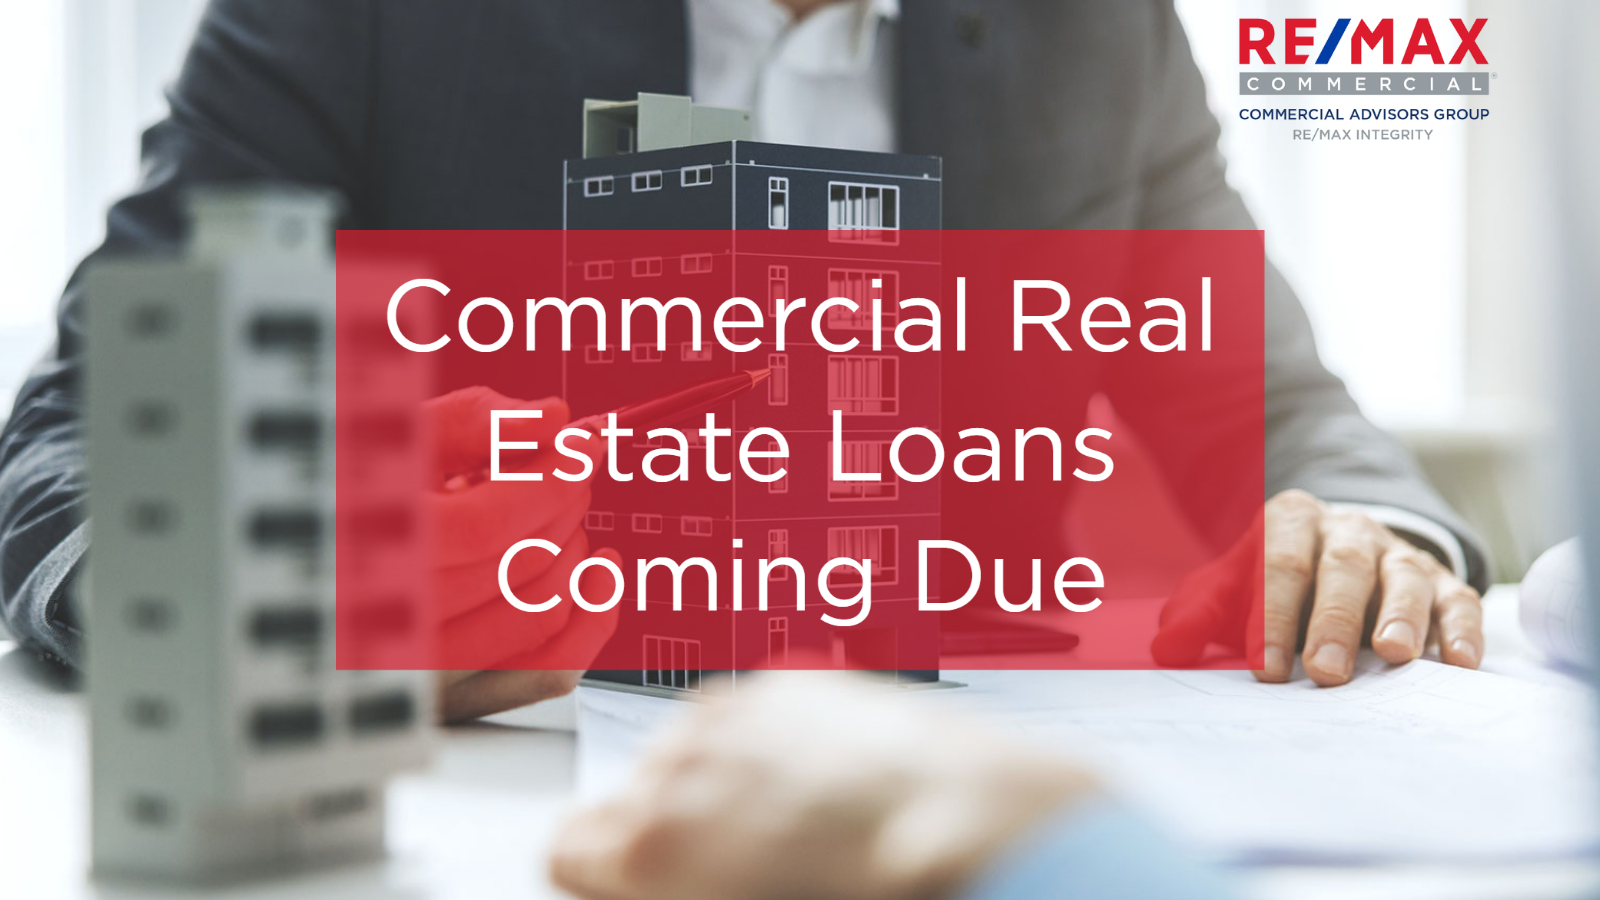 Commercial Real Estate Loans Coming Due: Are You Prepared?